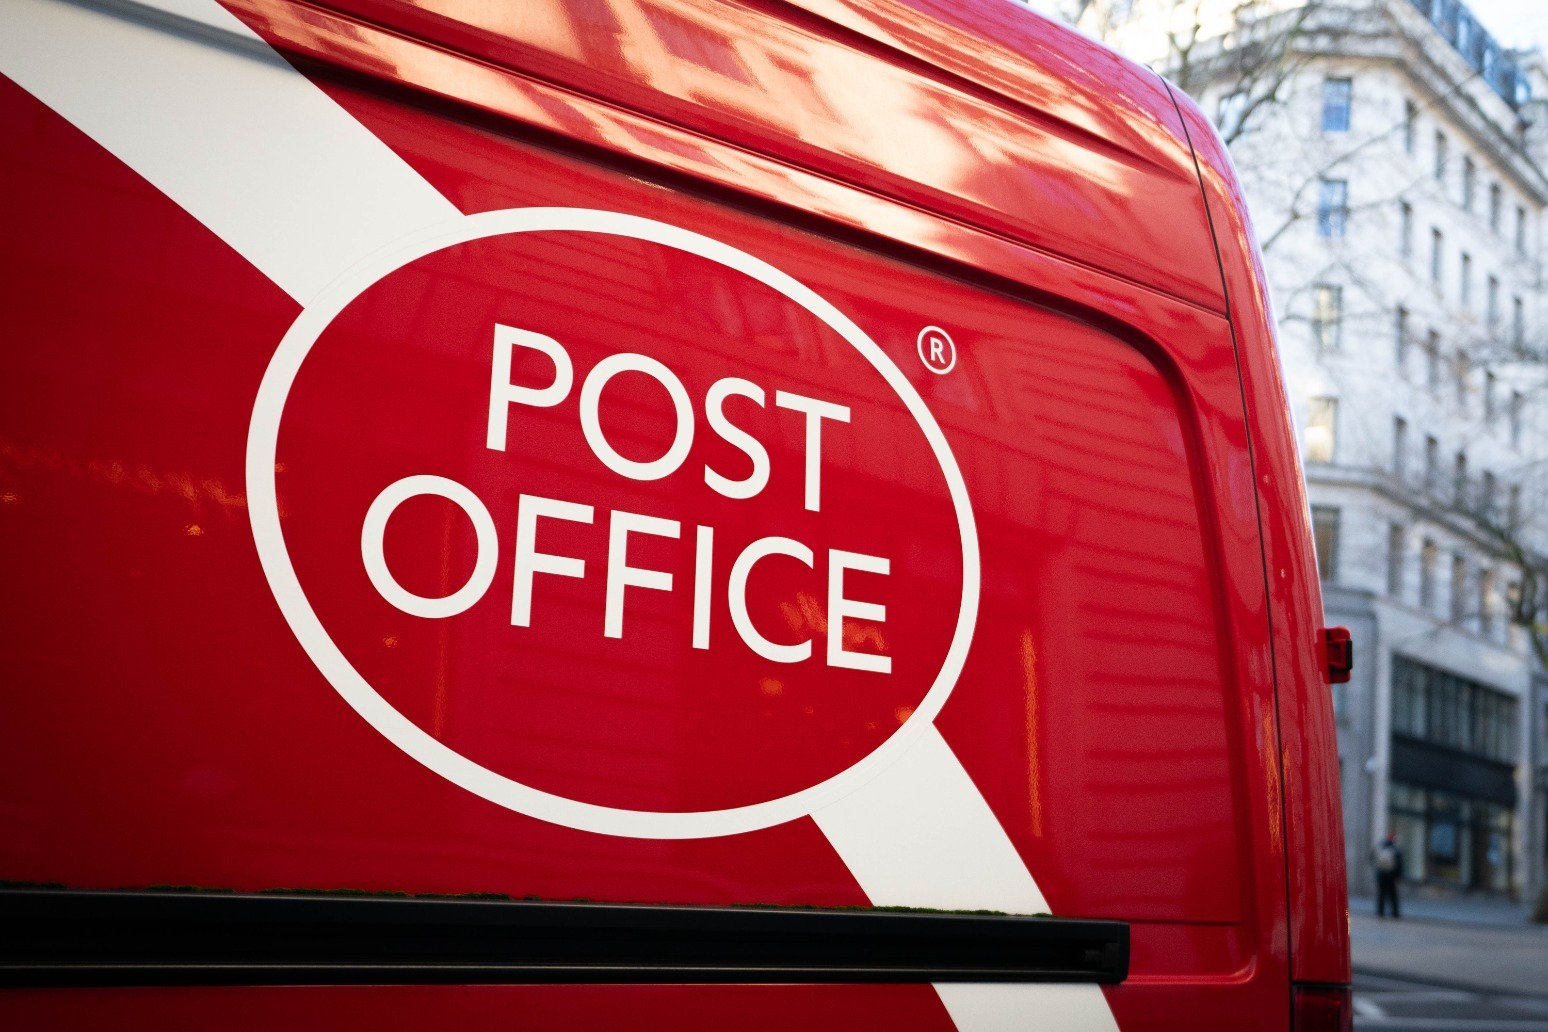 TUC accuses Government of ‘failing to act on lessons’ from Post Office scandal 